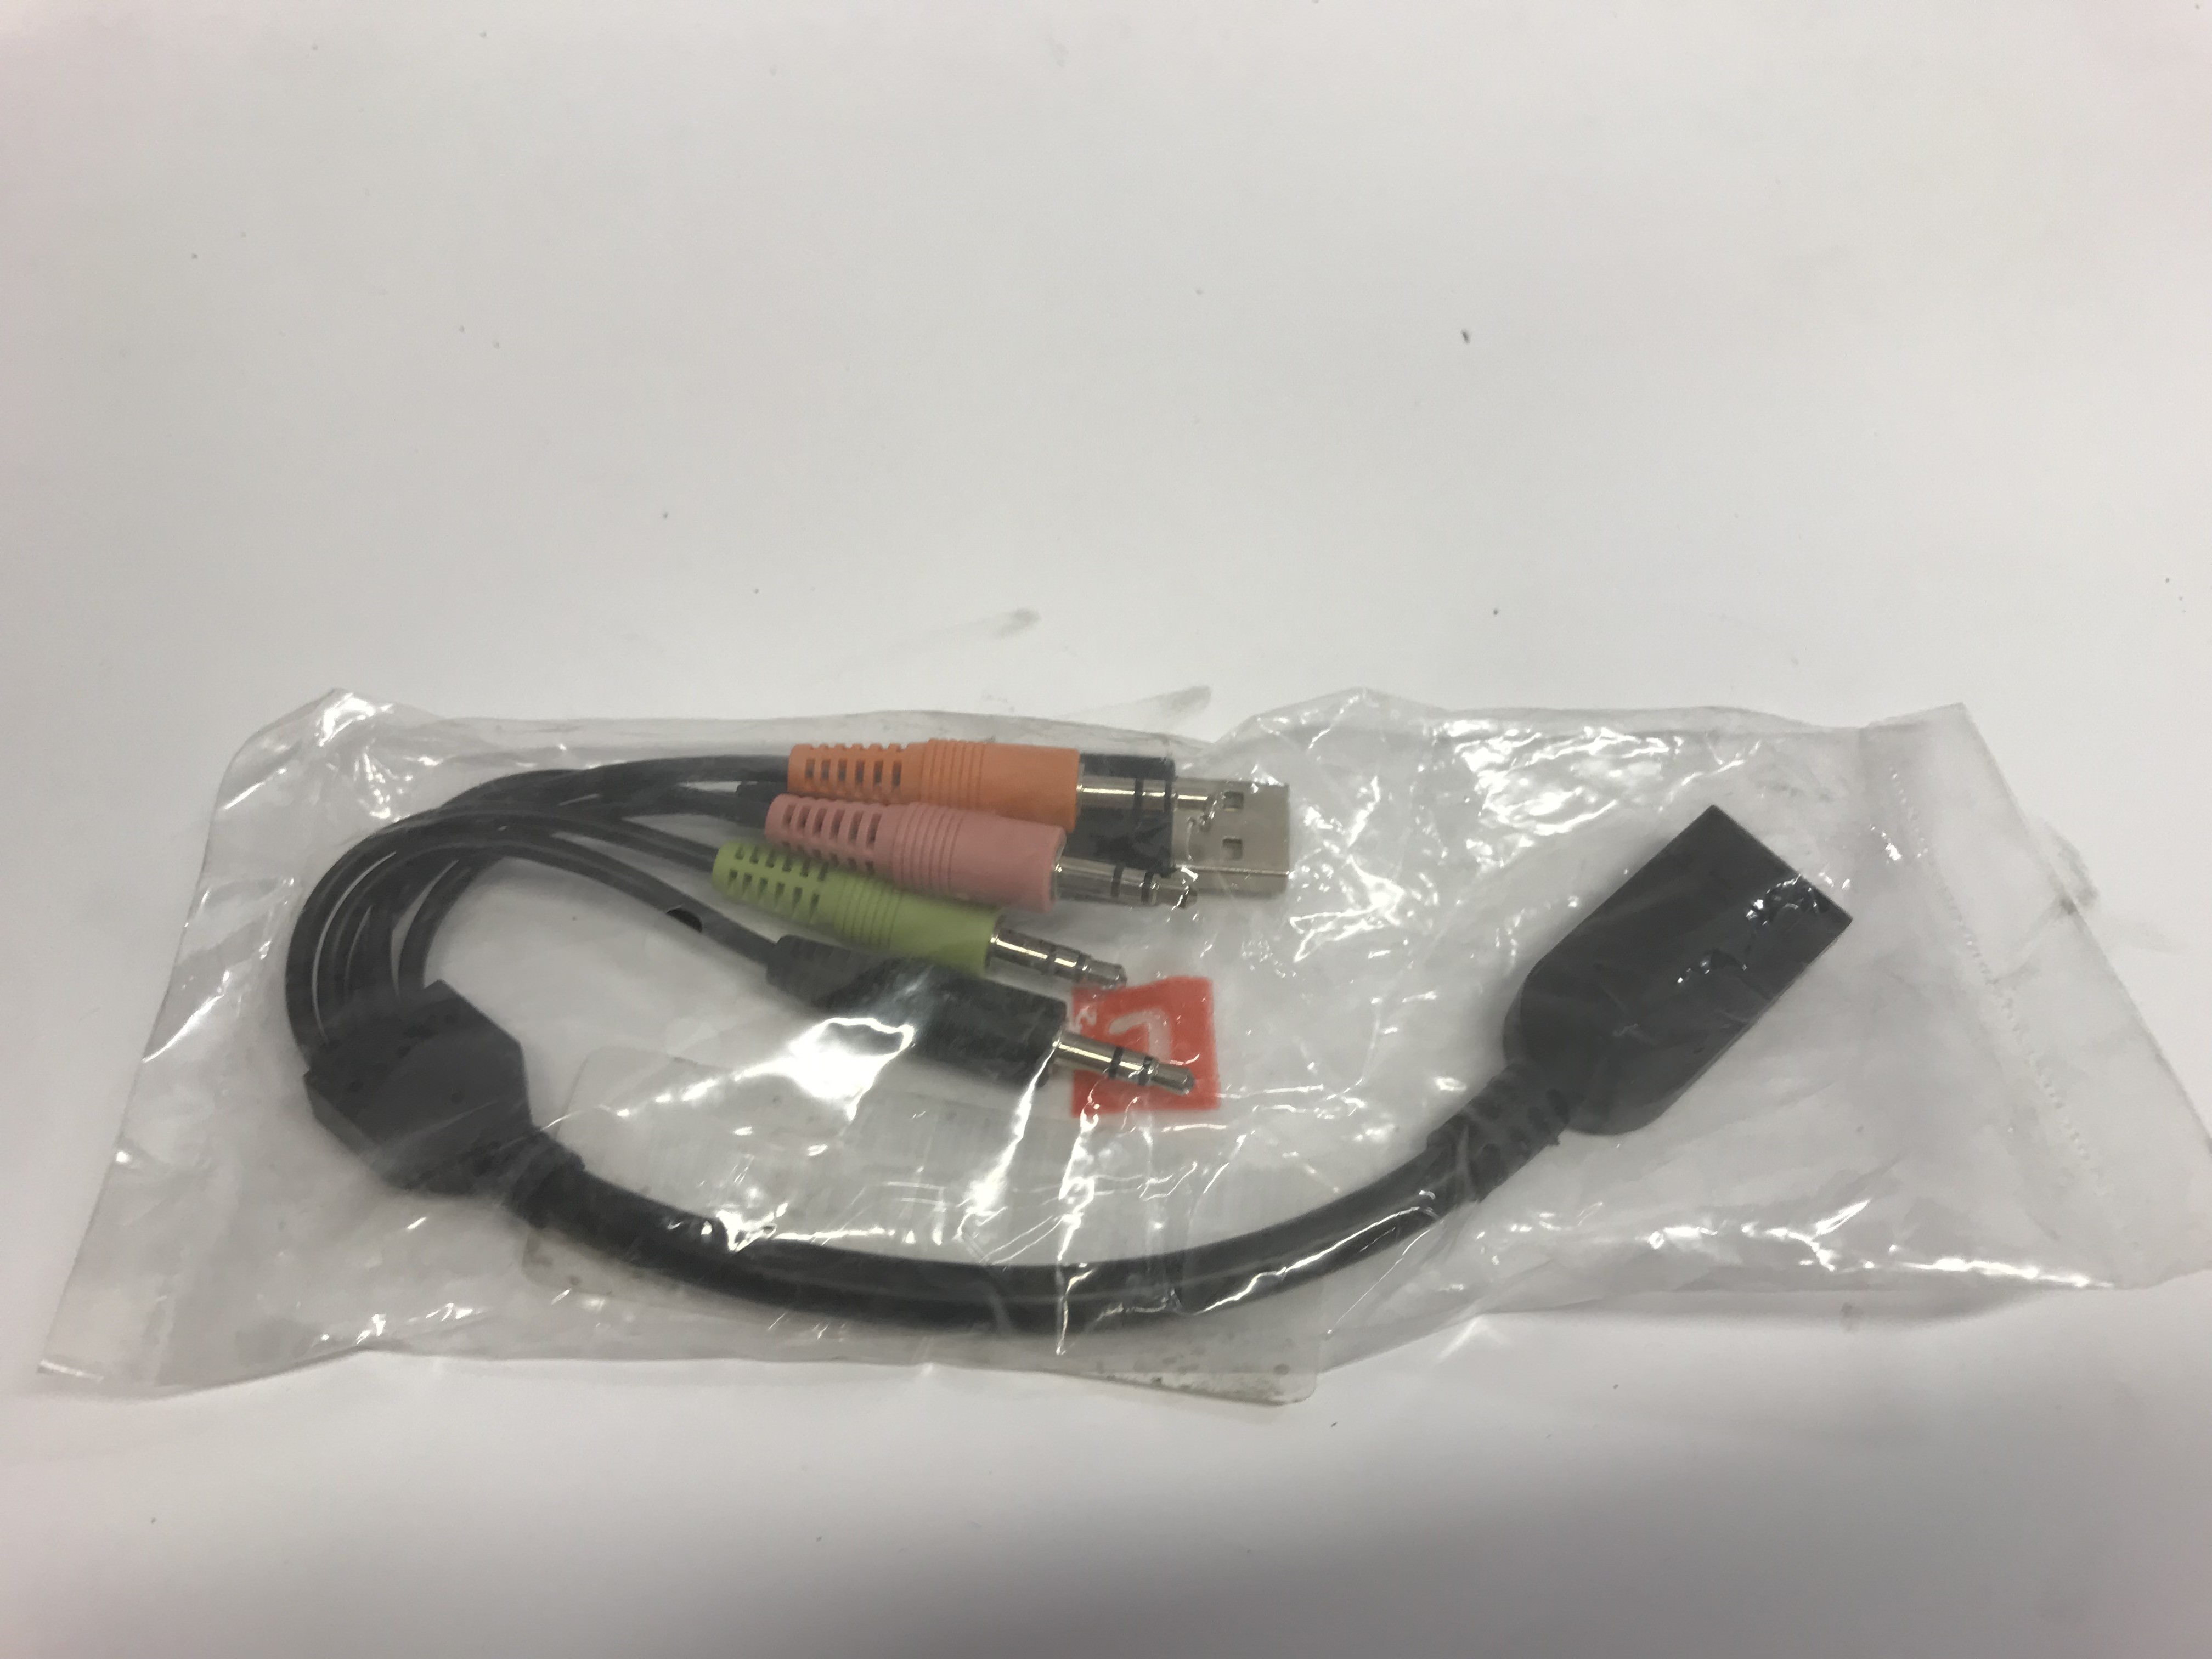 AXPRO 3.5mm PC Adapter Cable